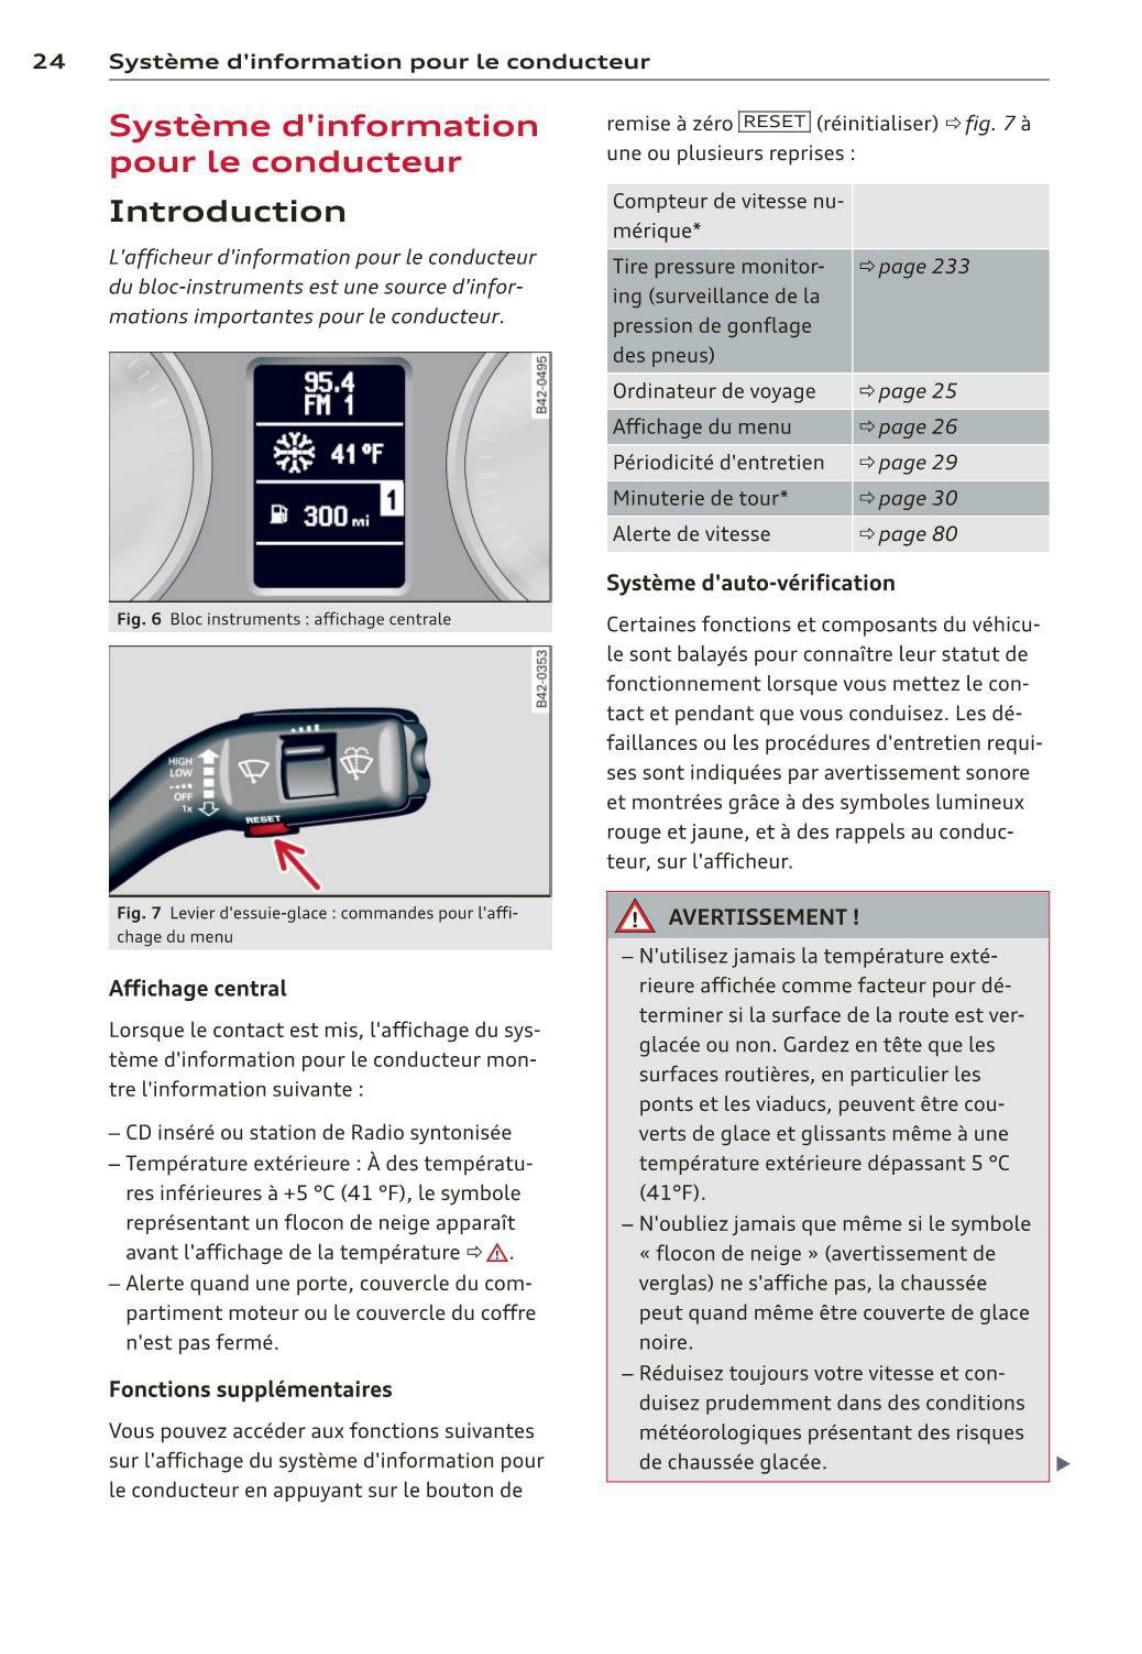 2014 Audi R8 Spyder Owner's Manual | French